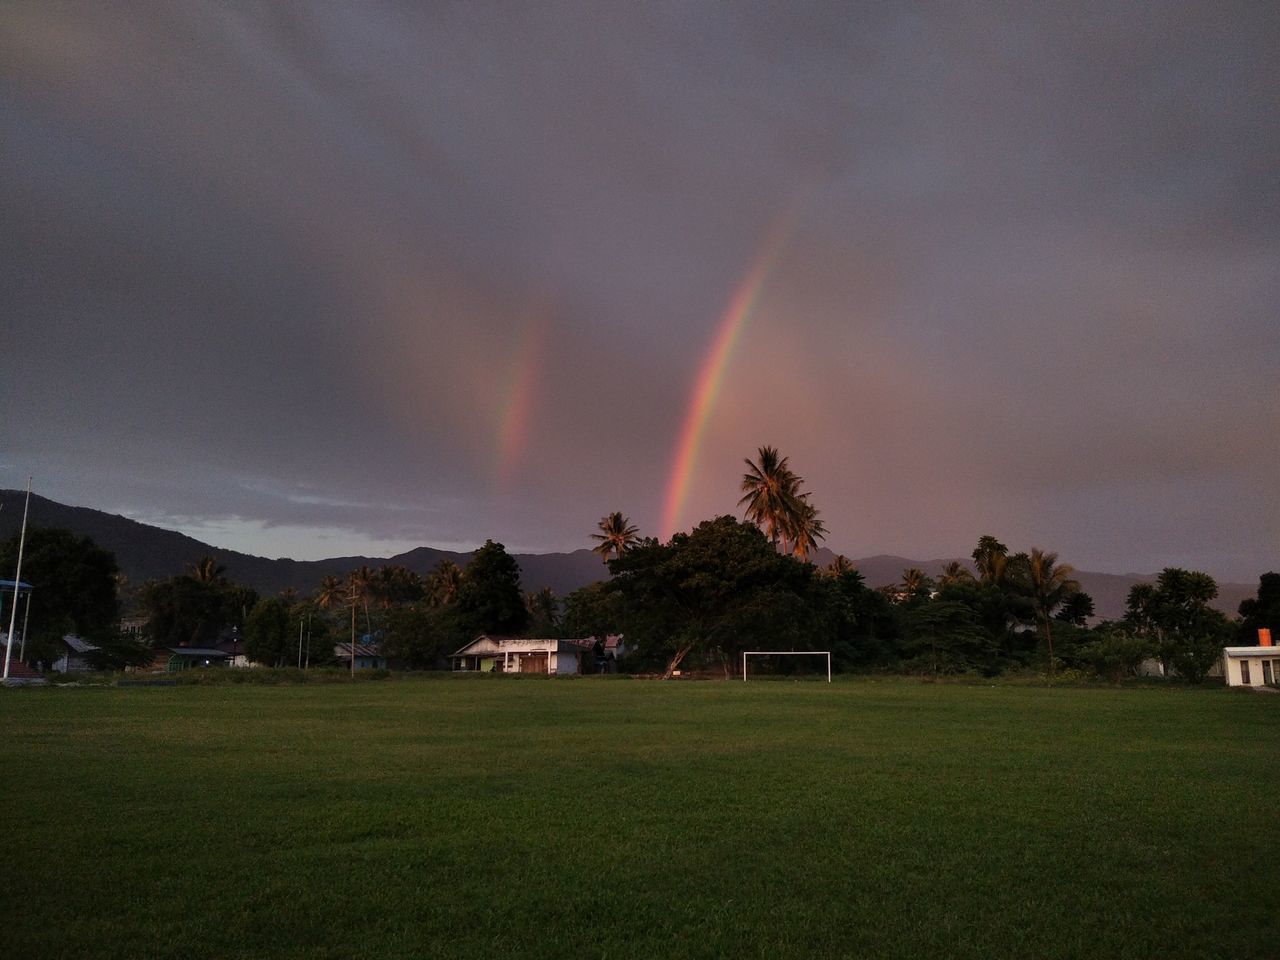 SCENIC VIEW OF RAINBOW AGAINST SKY